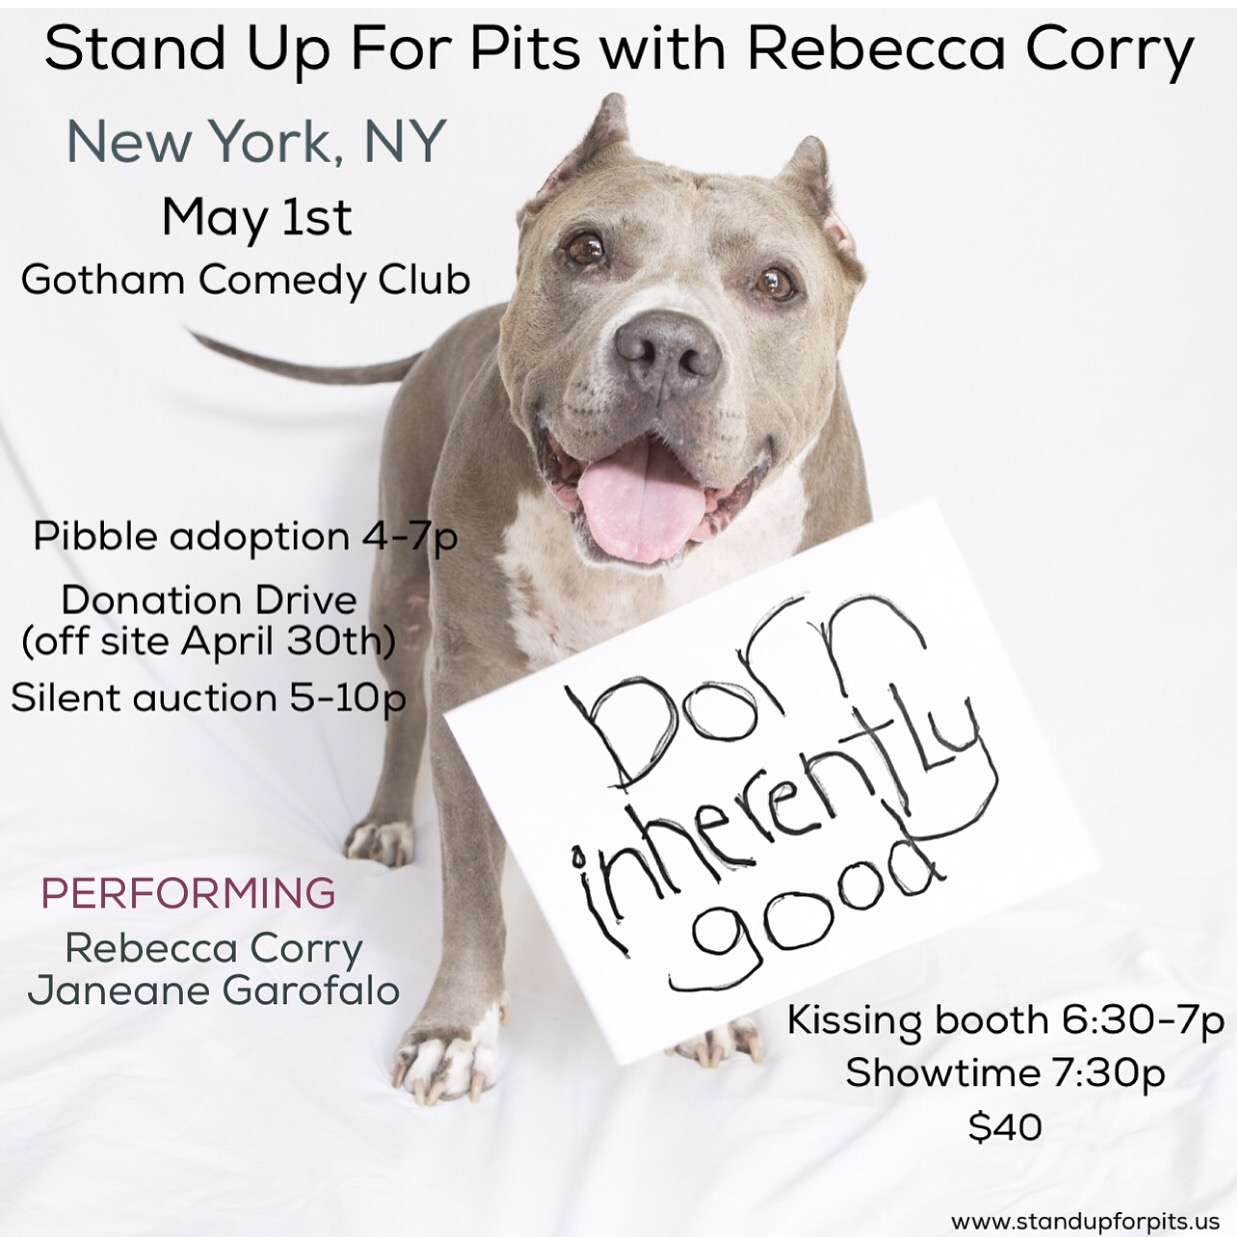 NYC Stand Up For Pits tickets are going fast!